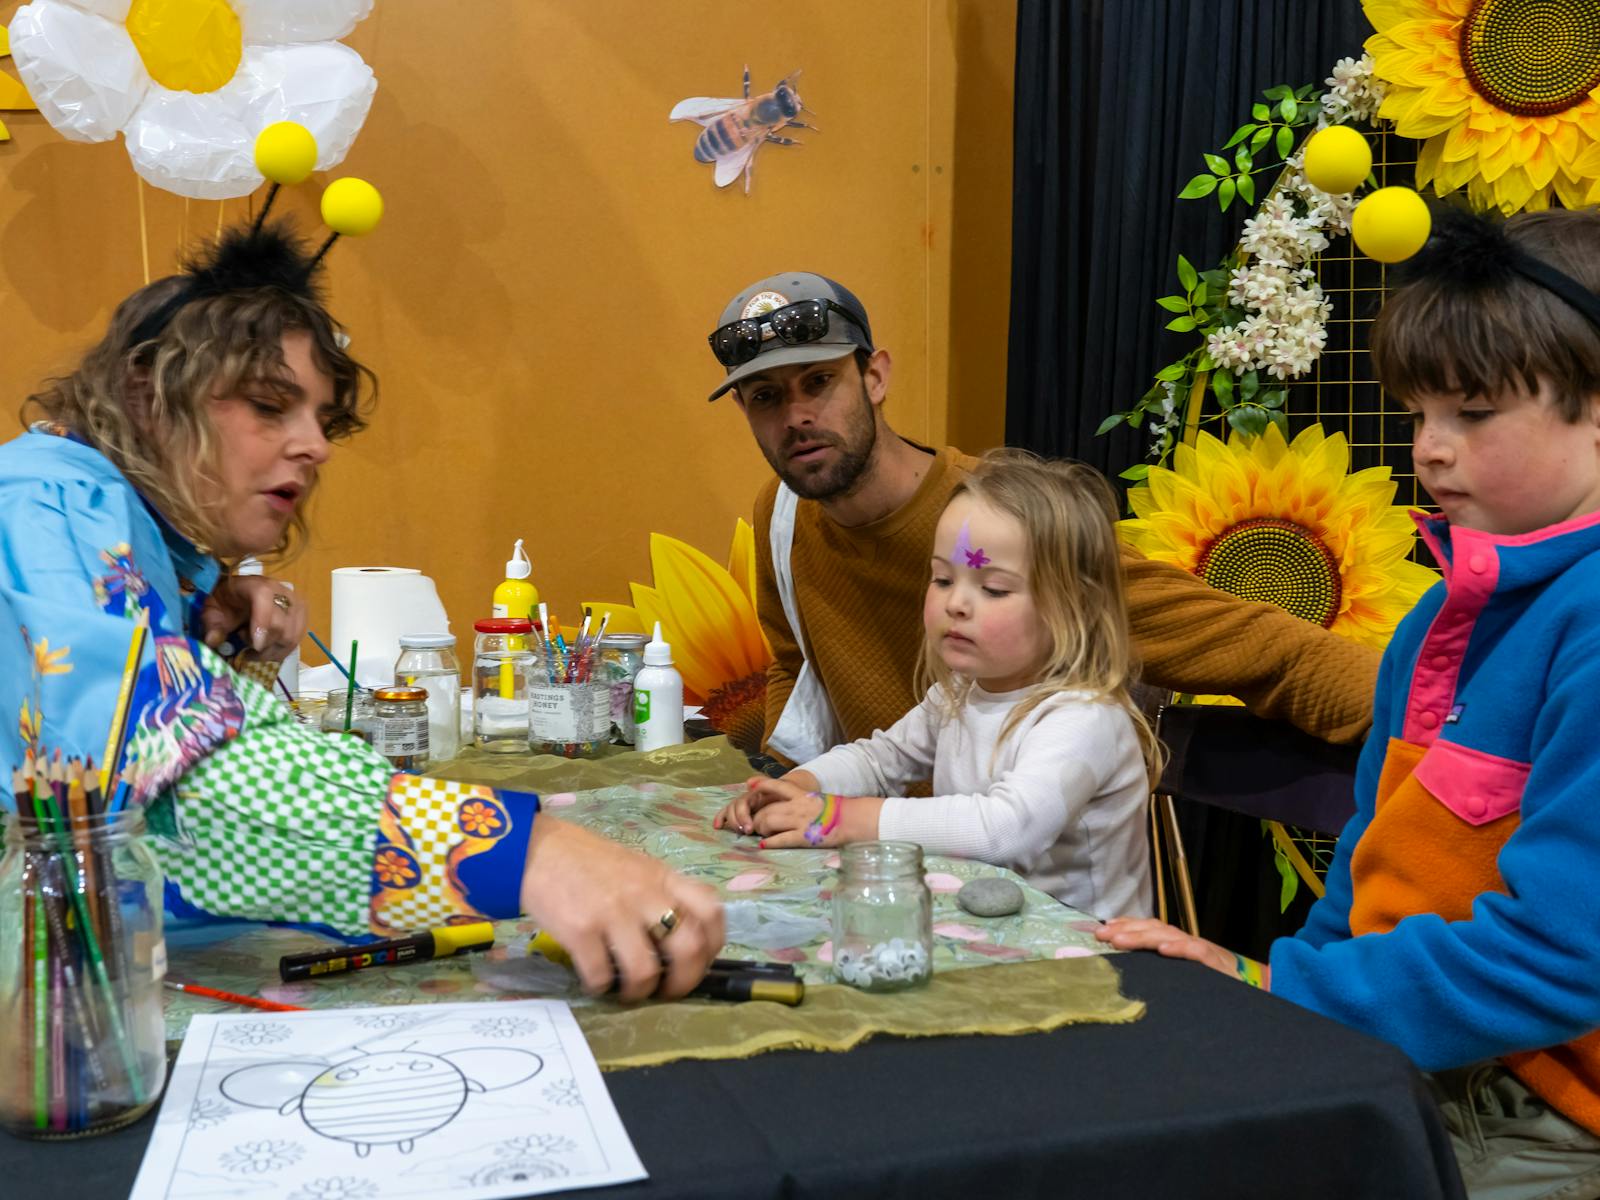 Ashton spent time with the children painting rocks, making bees and singing songs that delighted all